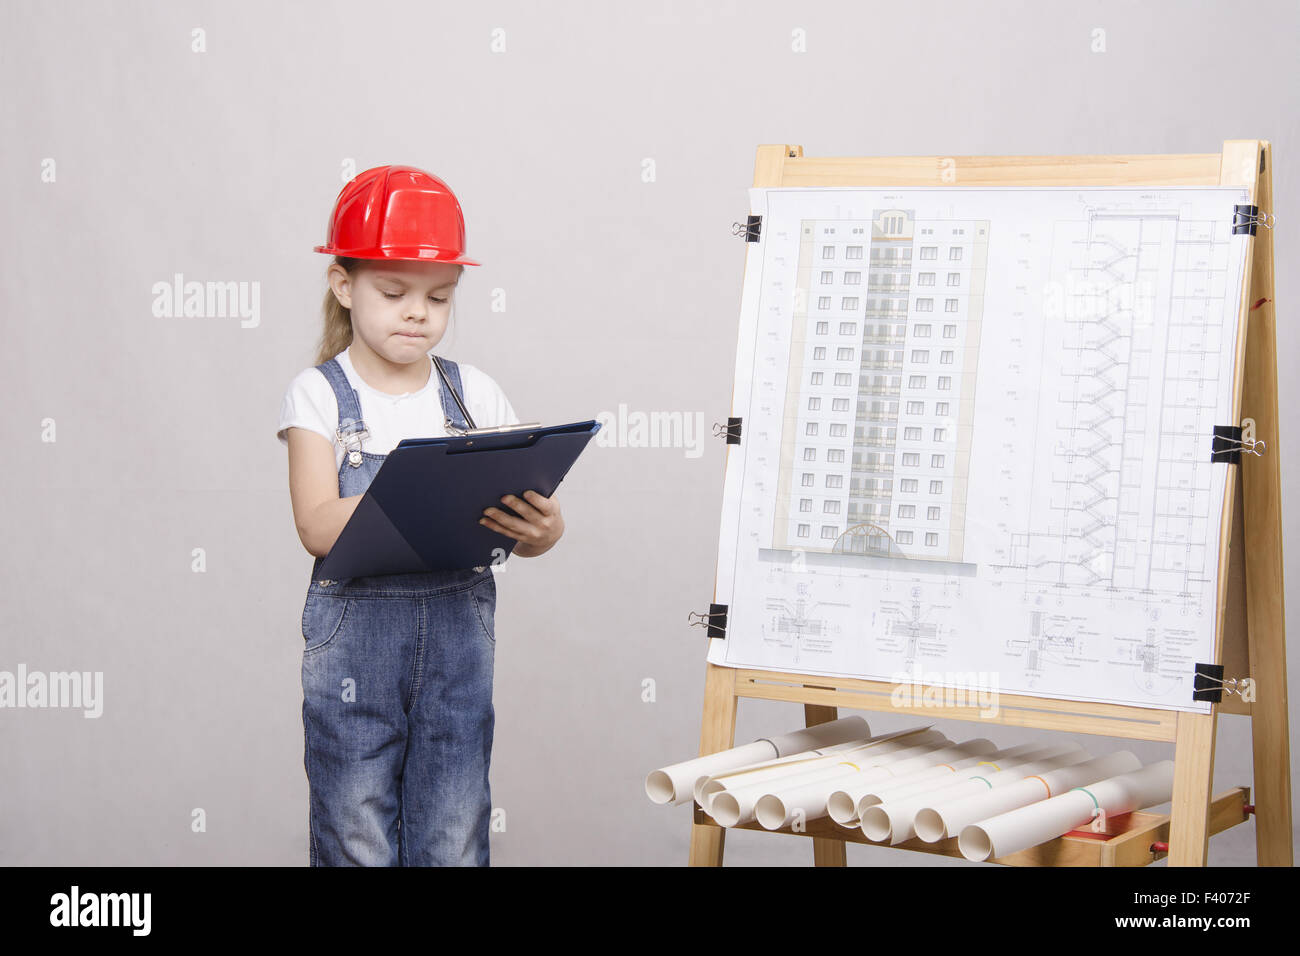 The child constructor is drawing near Stock Photo